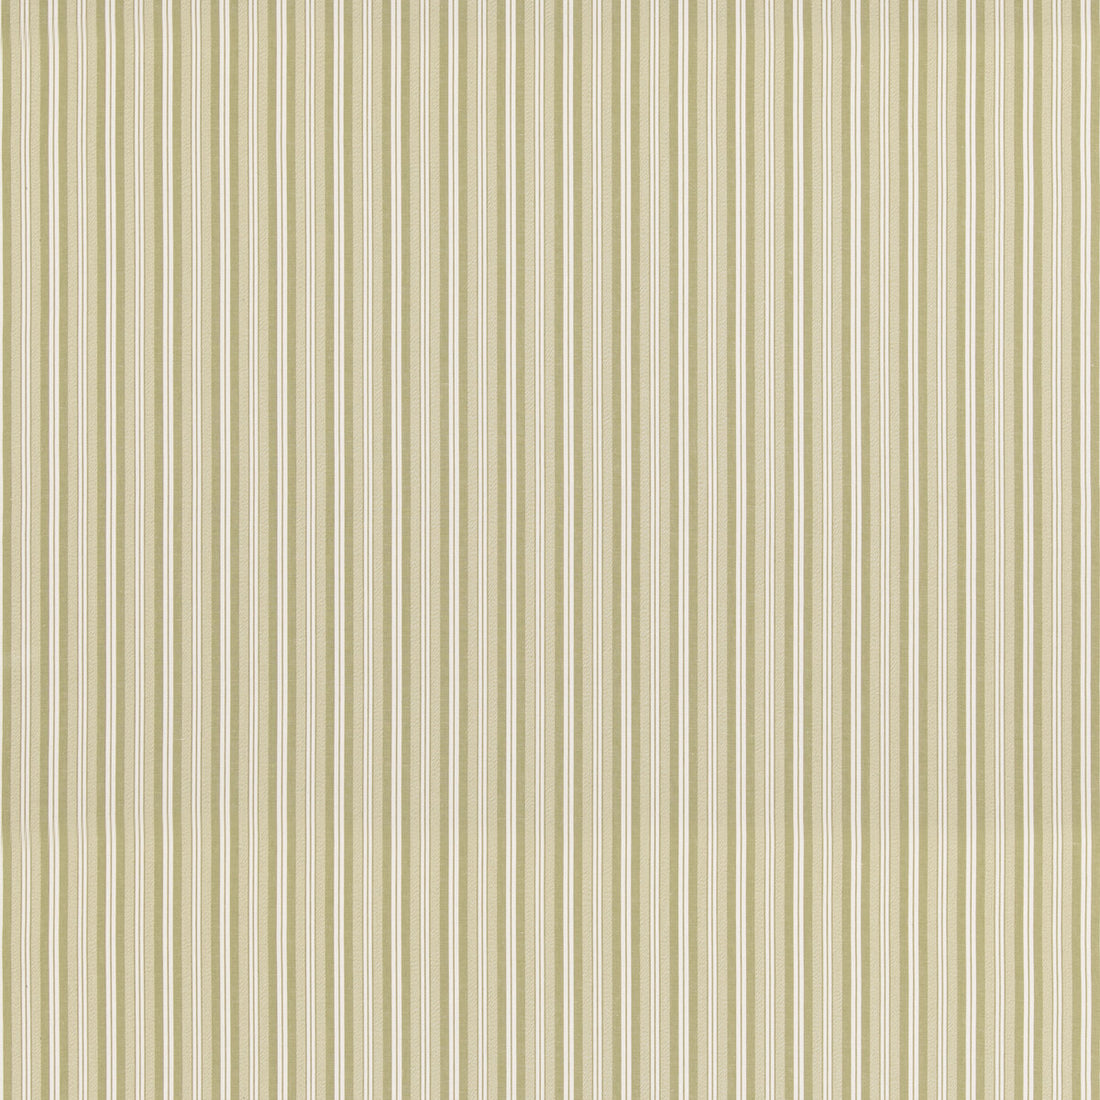 Laverton Stripe fabric in grass color - pattern BF11037.735.0 - by G P &amp; J Baker in the Baker House Plain &amp; Stripe II collection